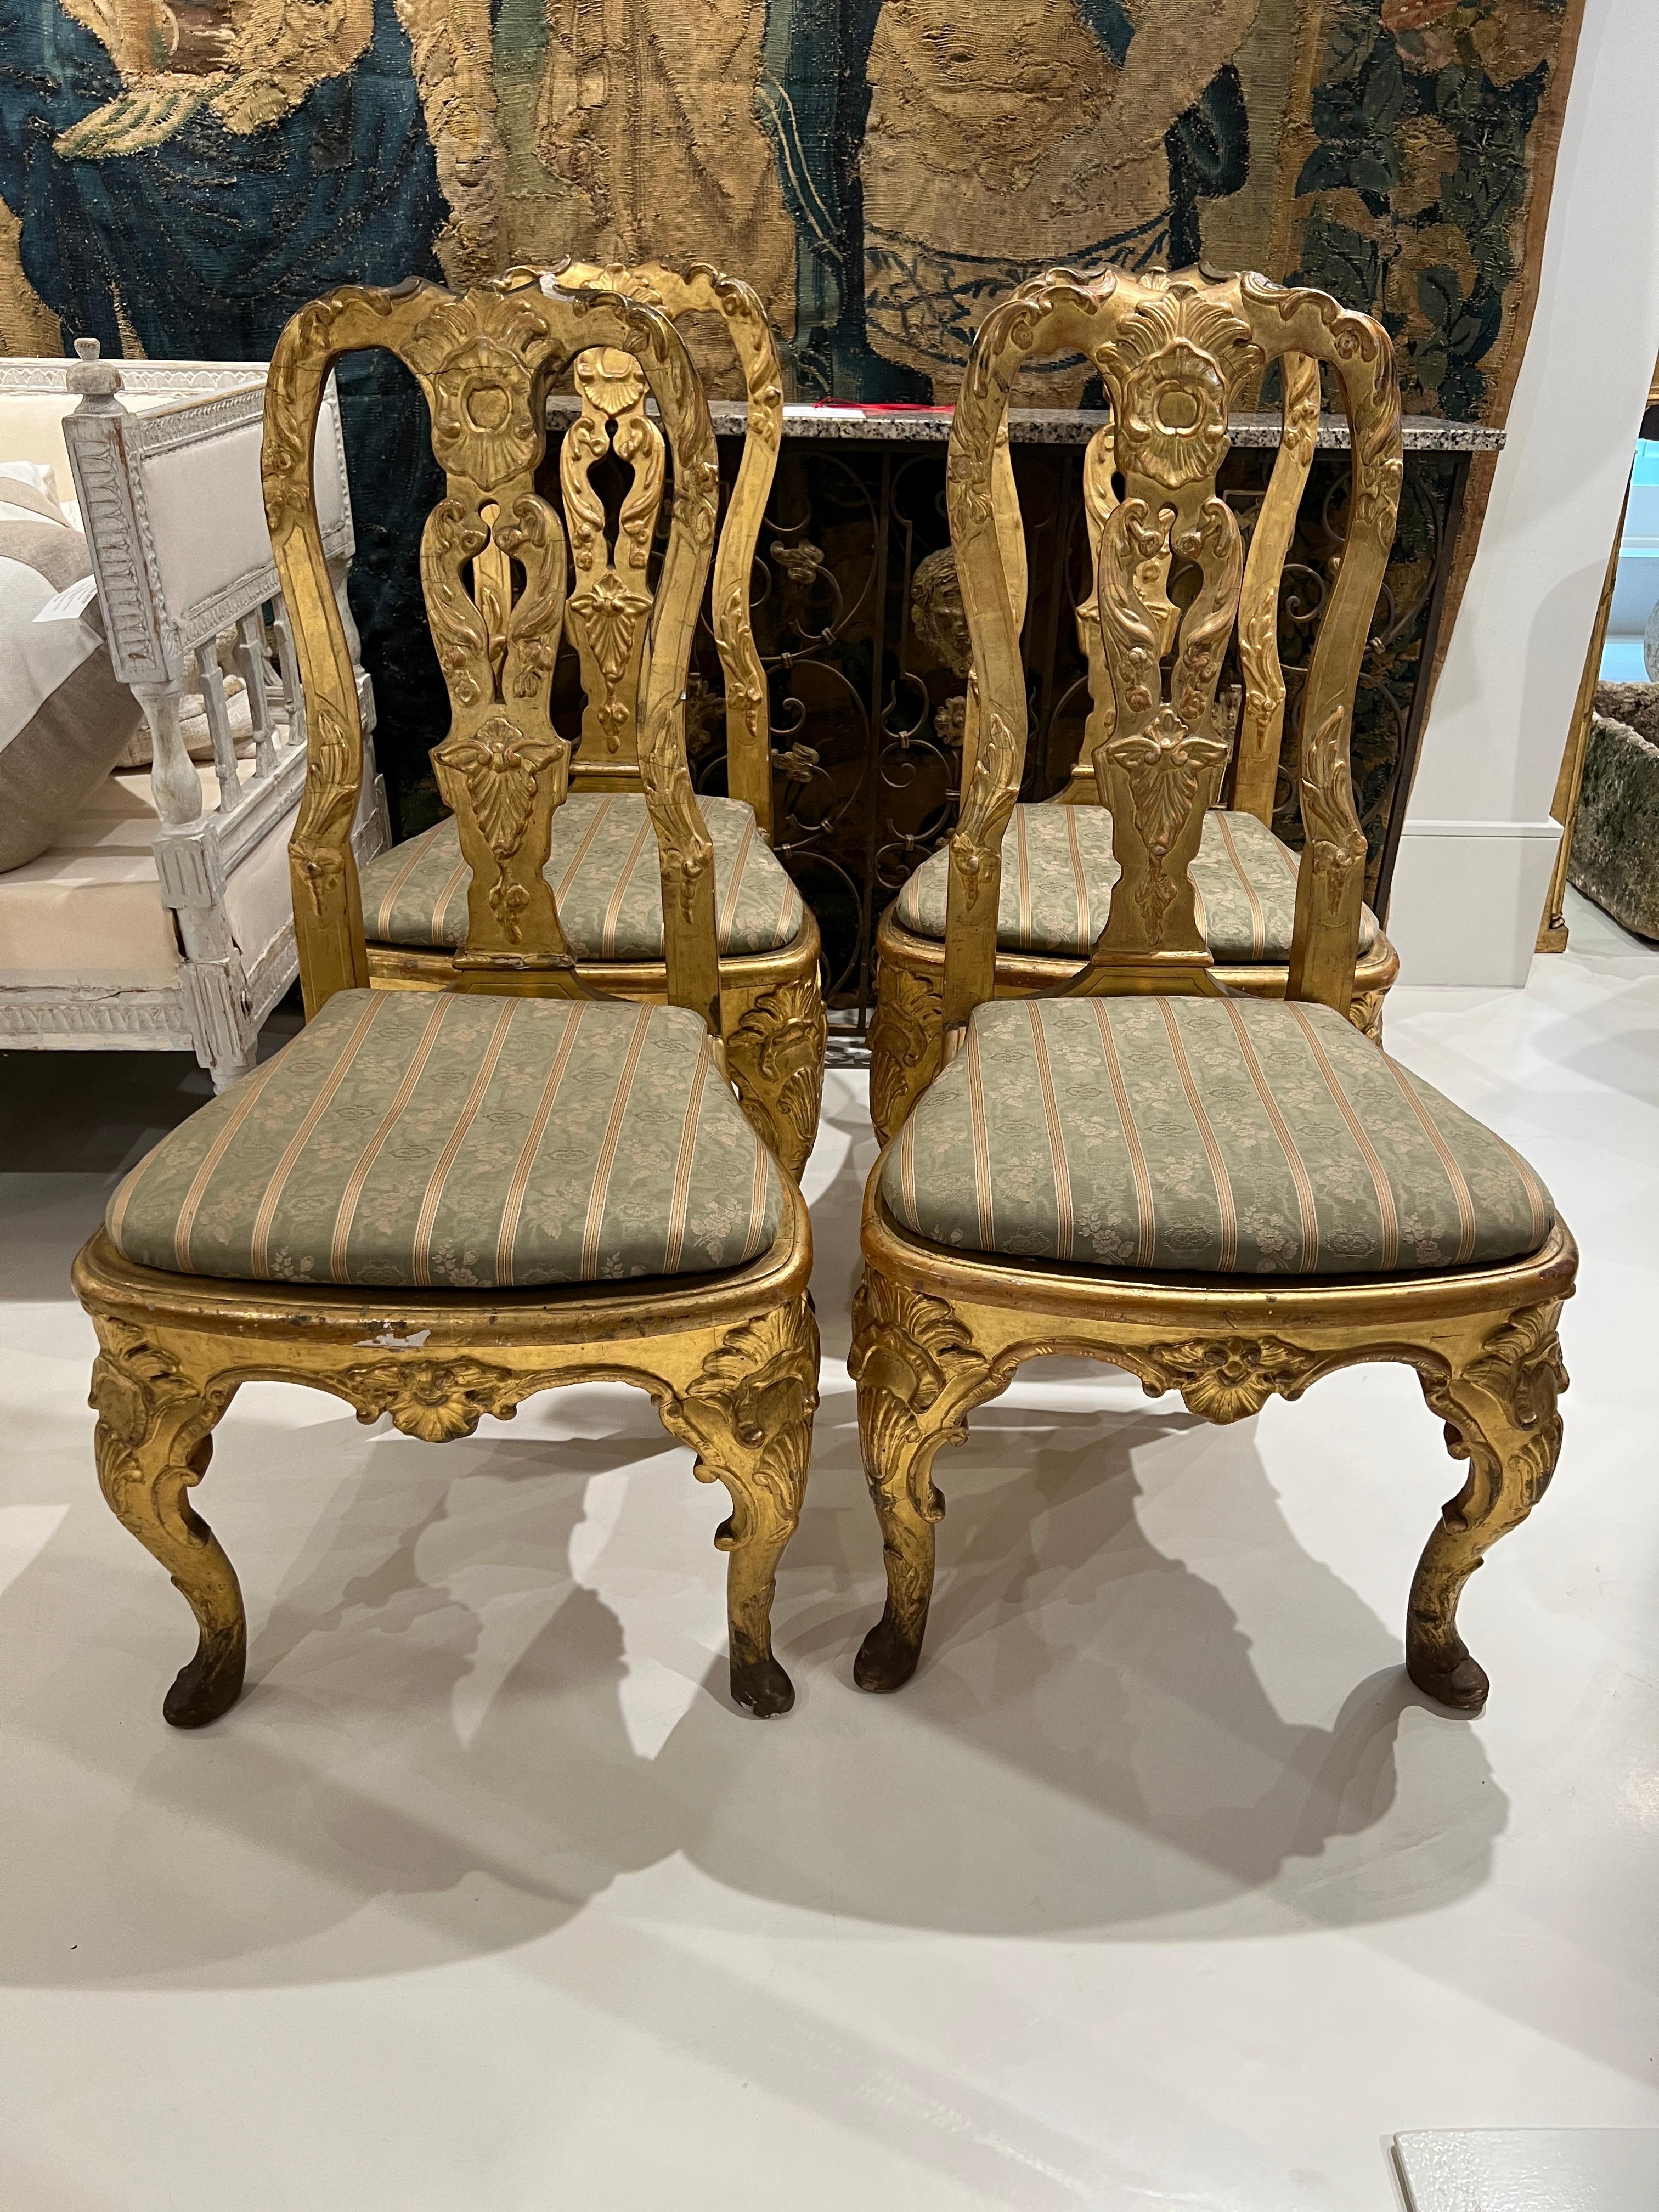 Four elegant matching side chairs with cabriole legs. Heavily gilded. Purchased in Lucca, Italy.